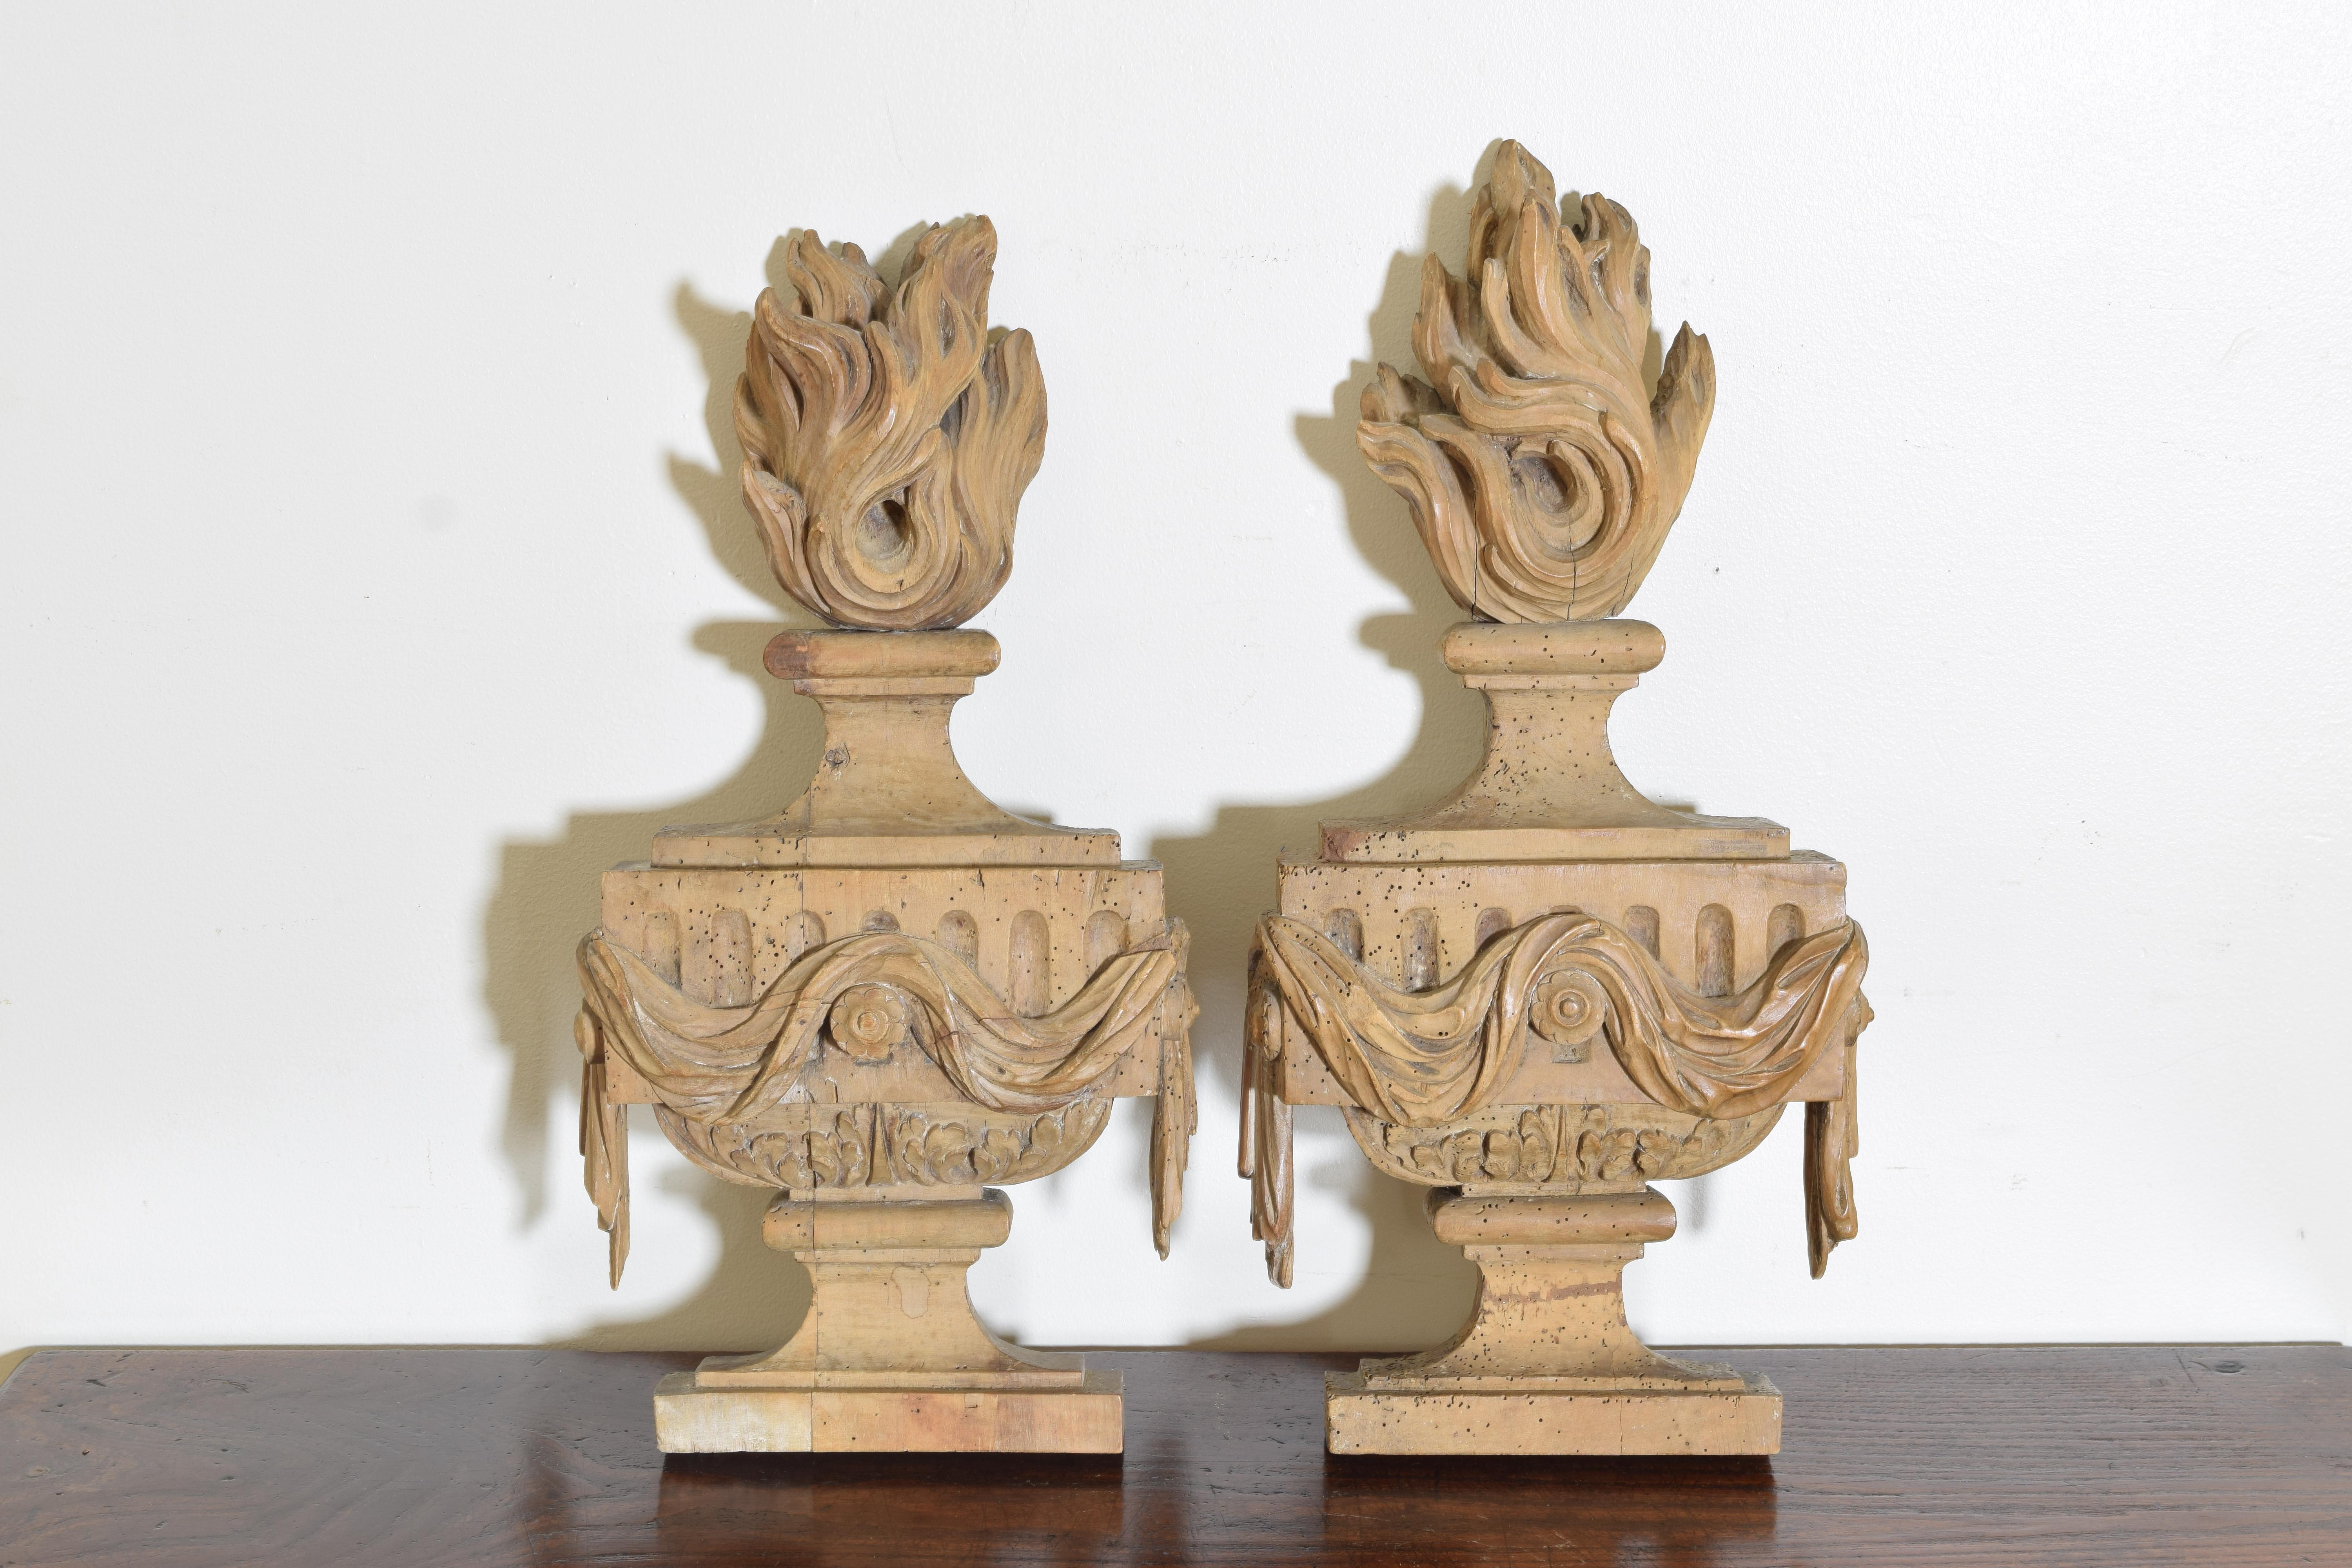 Expertly carved with urns emitting flames from their tops and draped in fabric swags, excellent as lamp bases